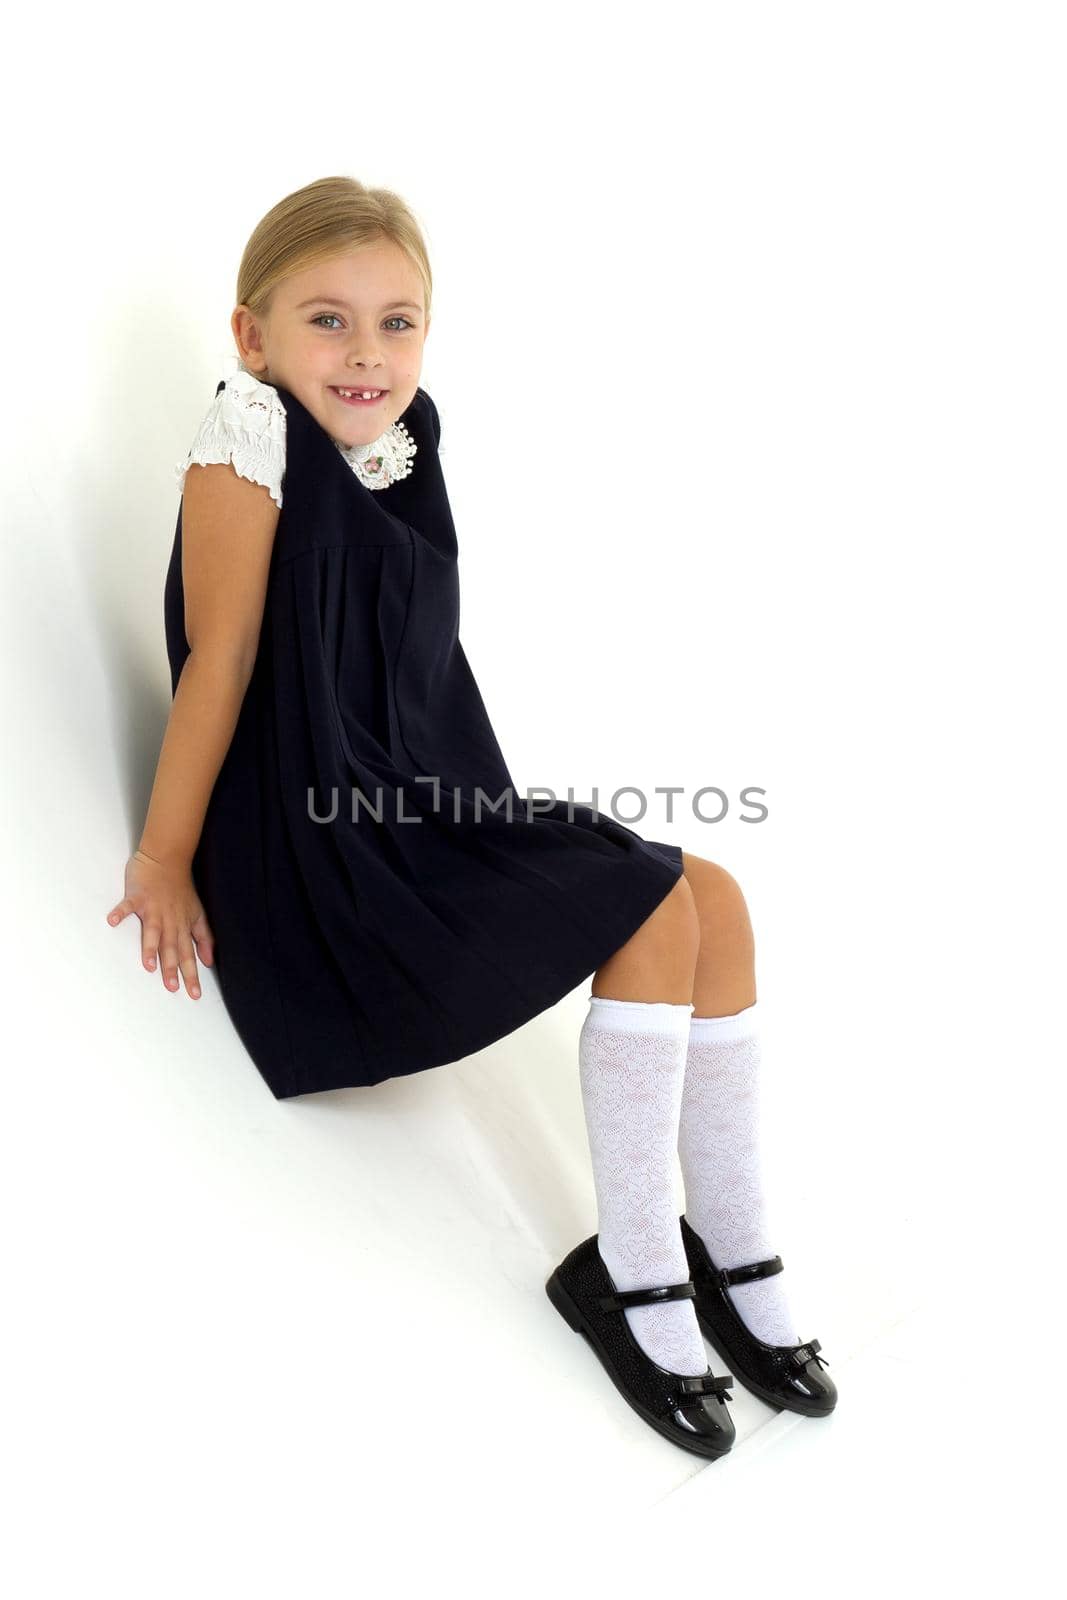 Lovely girl posing in studio on background. Cheerful blonde girl wearing school uniform sitting on floor leaning back on her hands. Cute seven years old kid in white blouse and blue dress